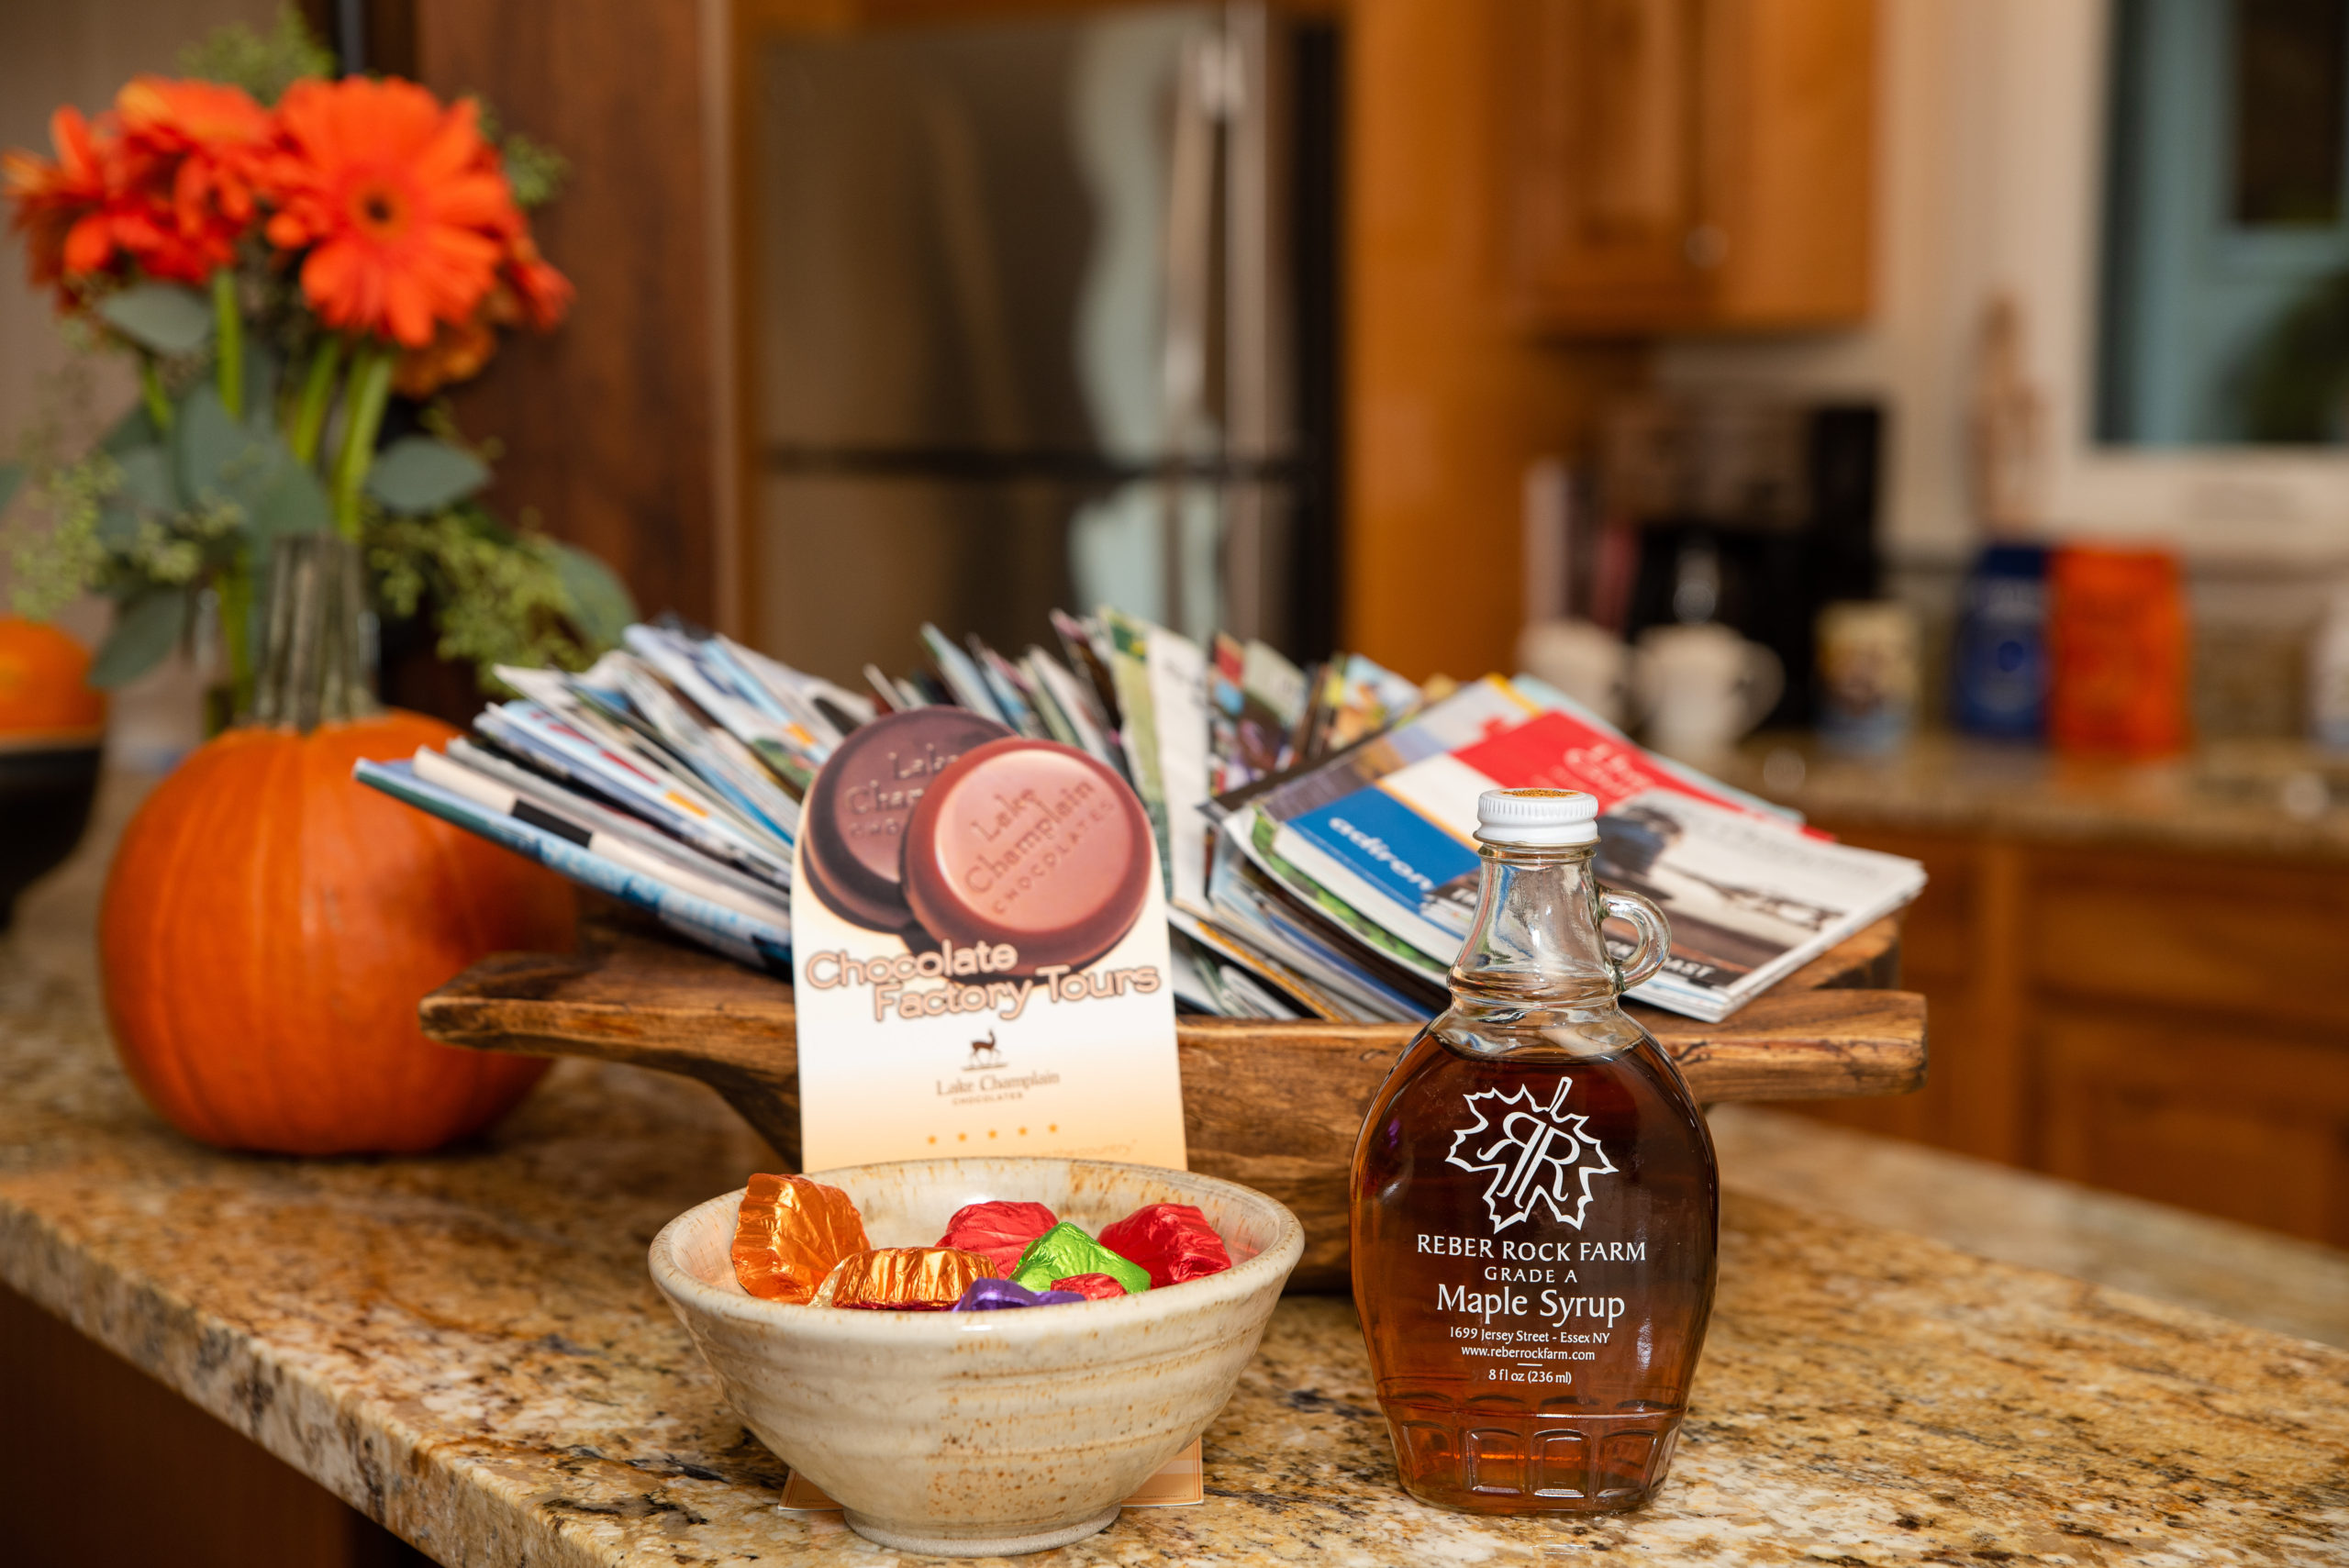 Sample our complimentary local maple syrup and Lake Champlain chocolates.